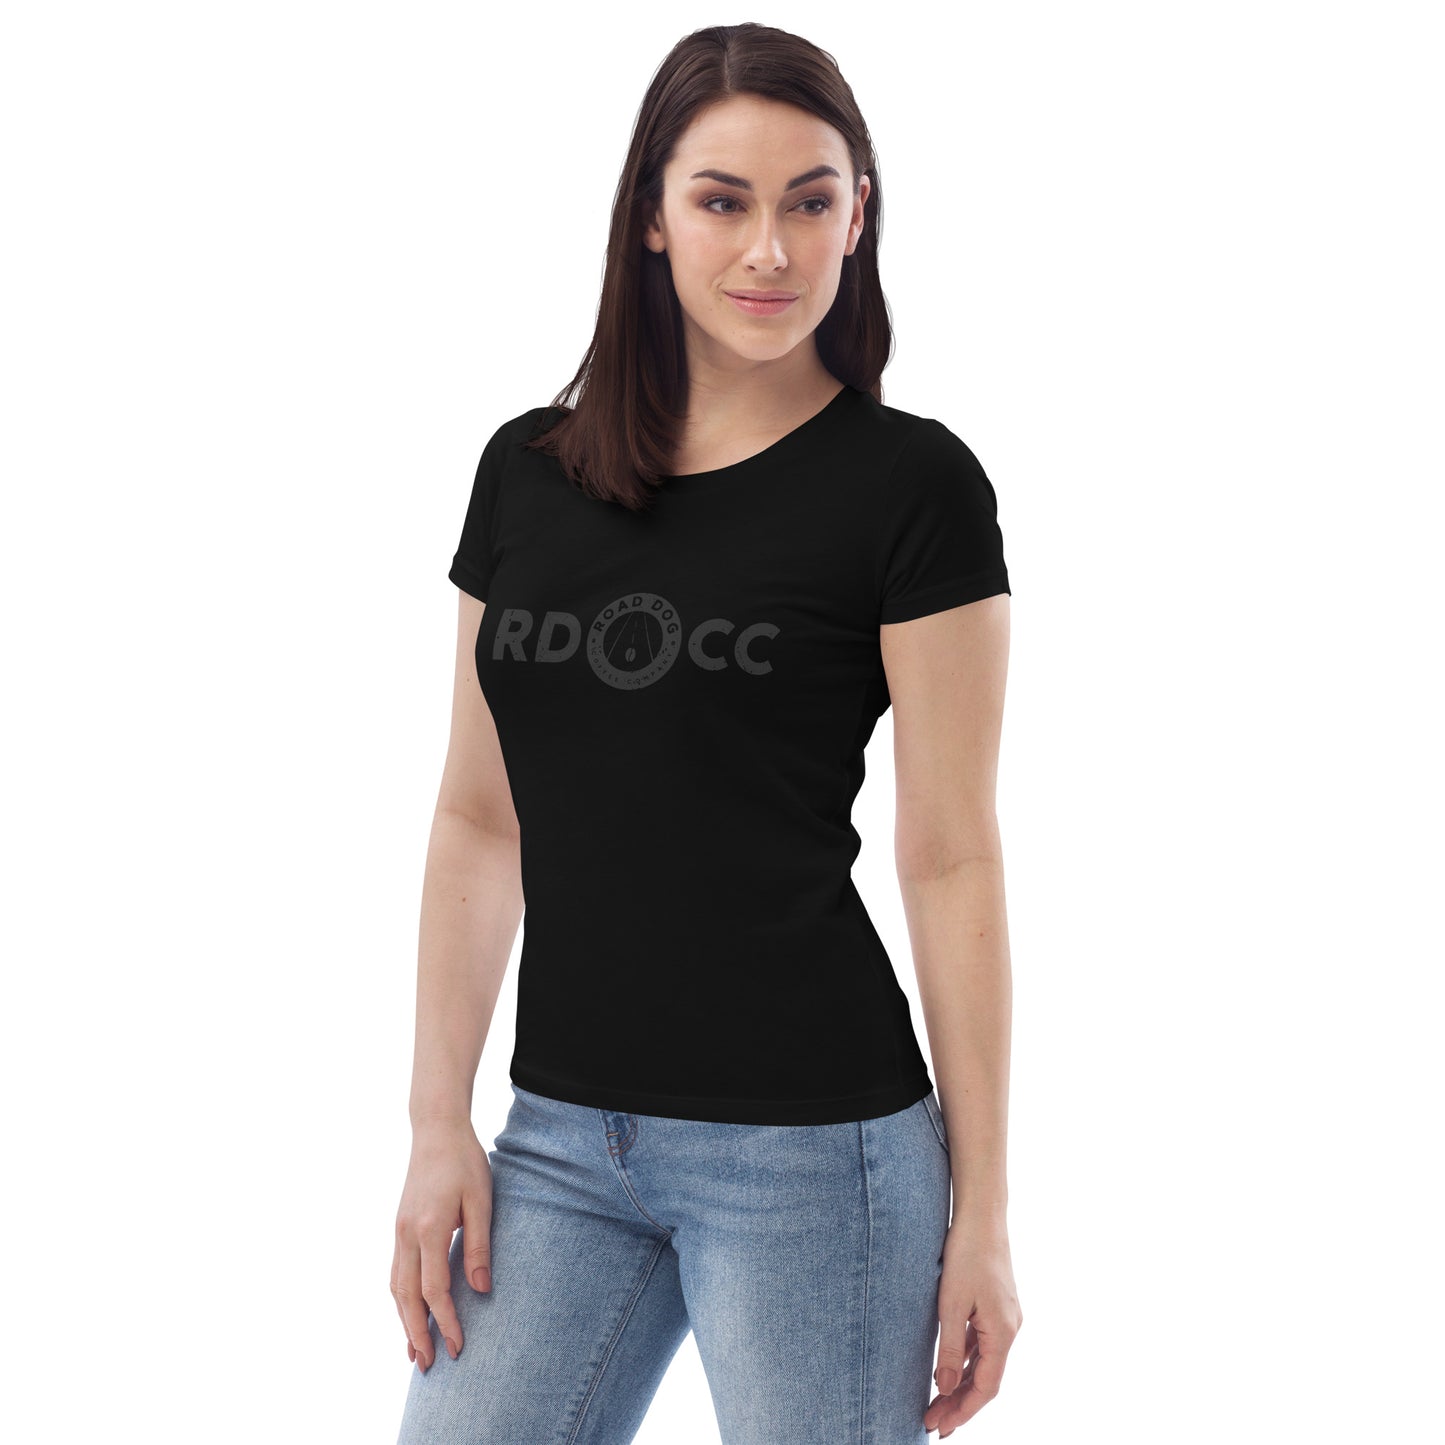 WOMEN'S FITTED RDCC/MEDALLION TEE